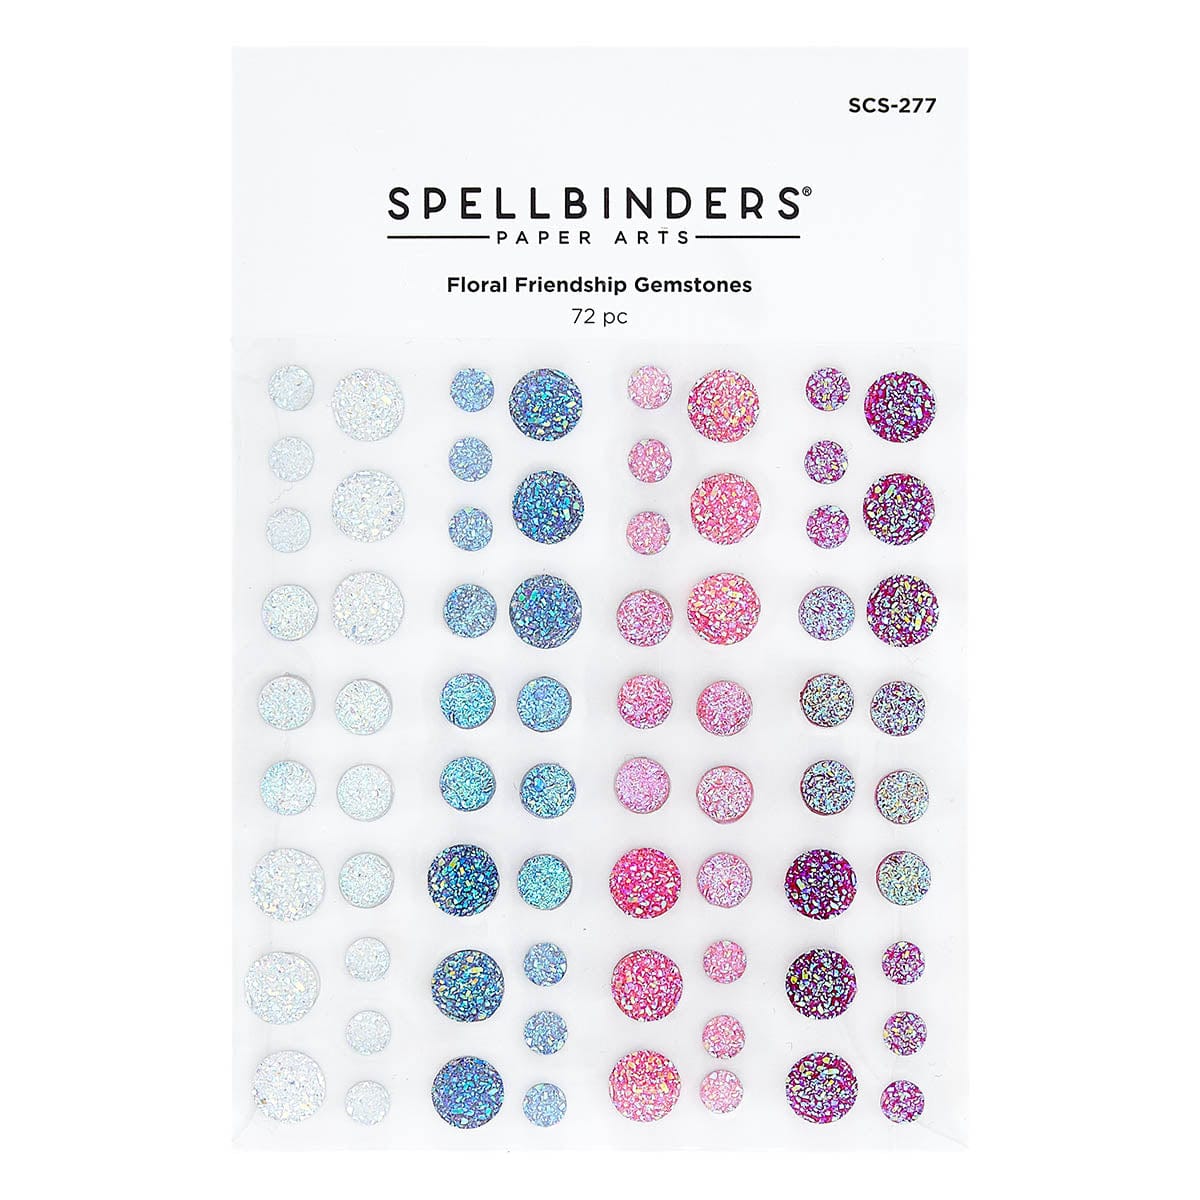 Iridescent Gemstones from the Floral Friendship Collection | Spellbinders -  Spellbinders Paper Arts